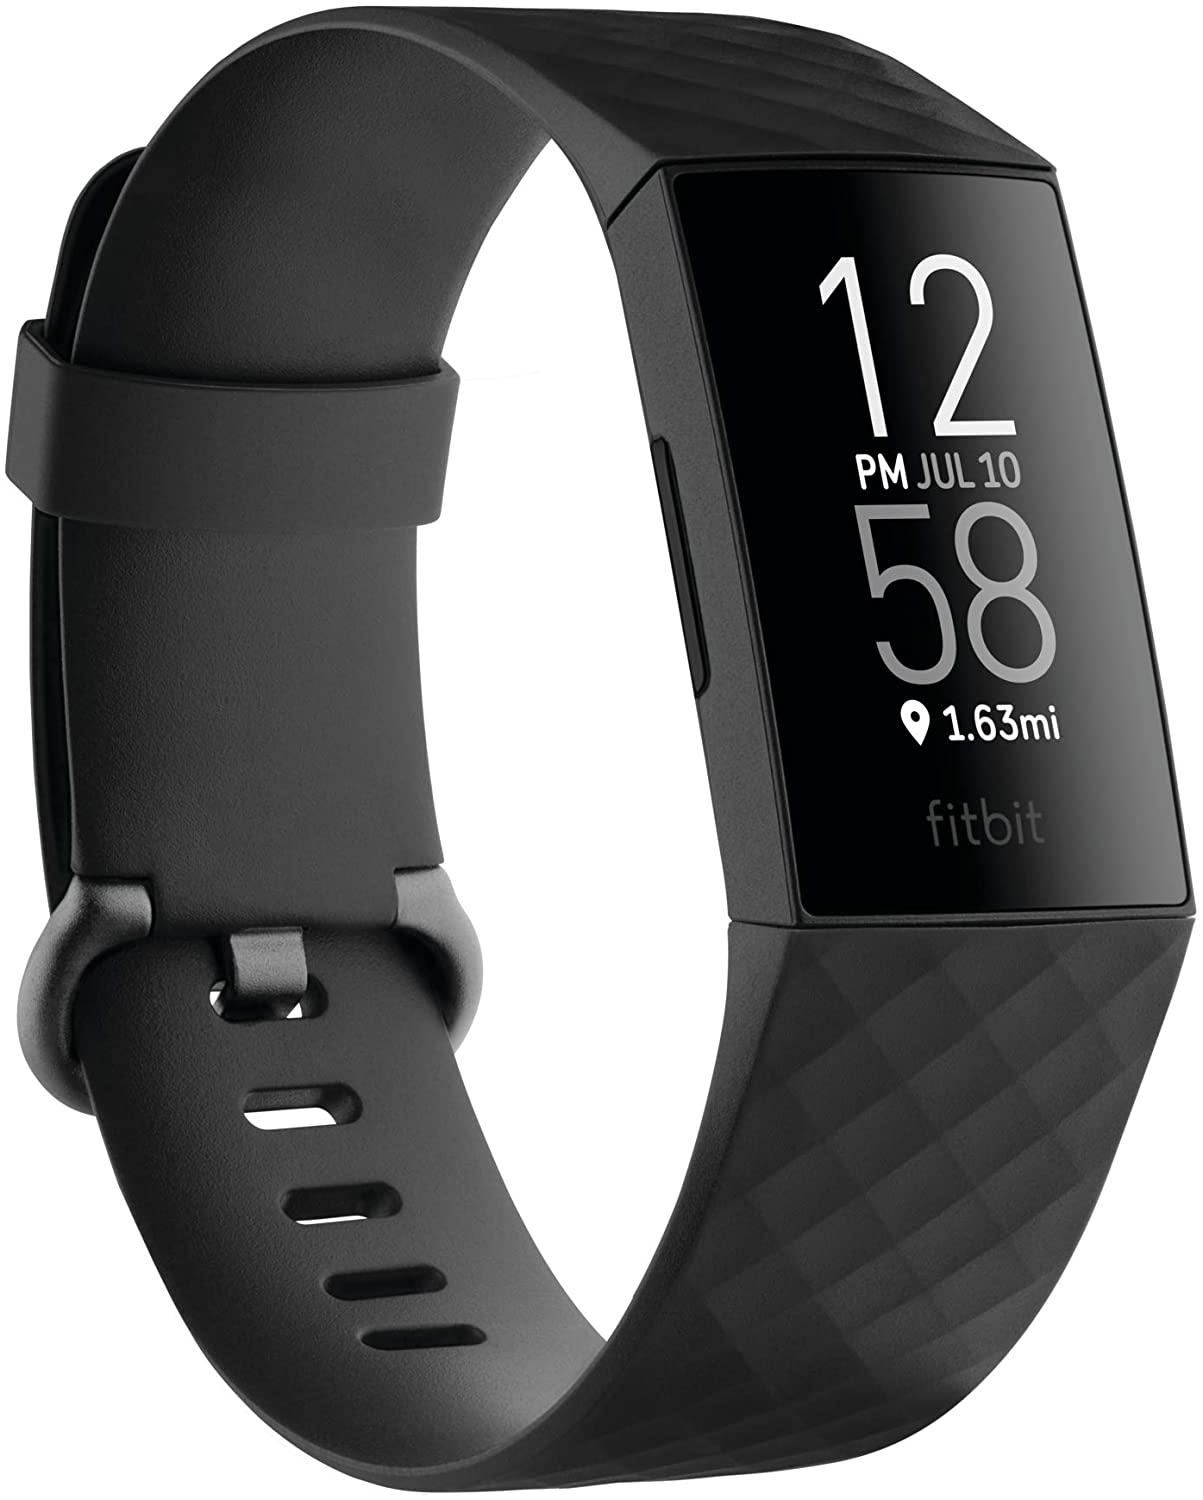 Review of Fitbit Charge 4 Fitness and Activity Tracker